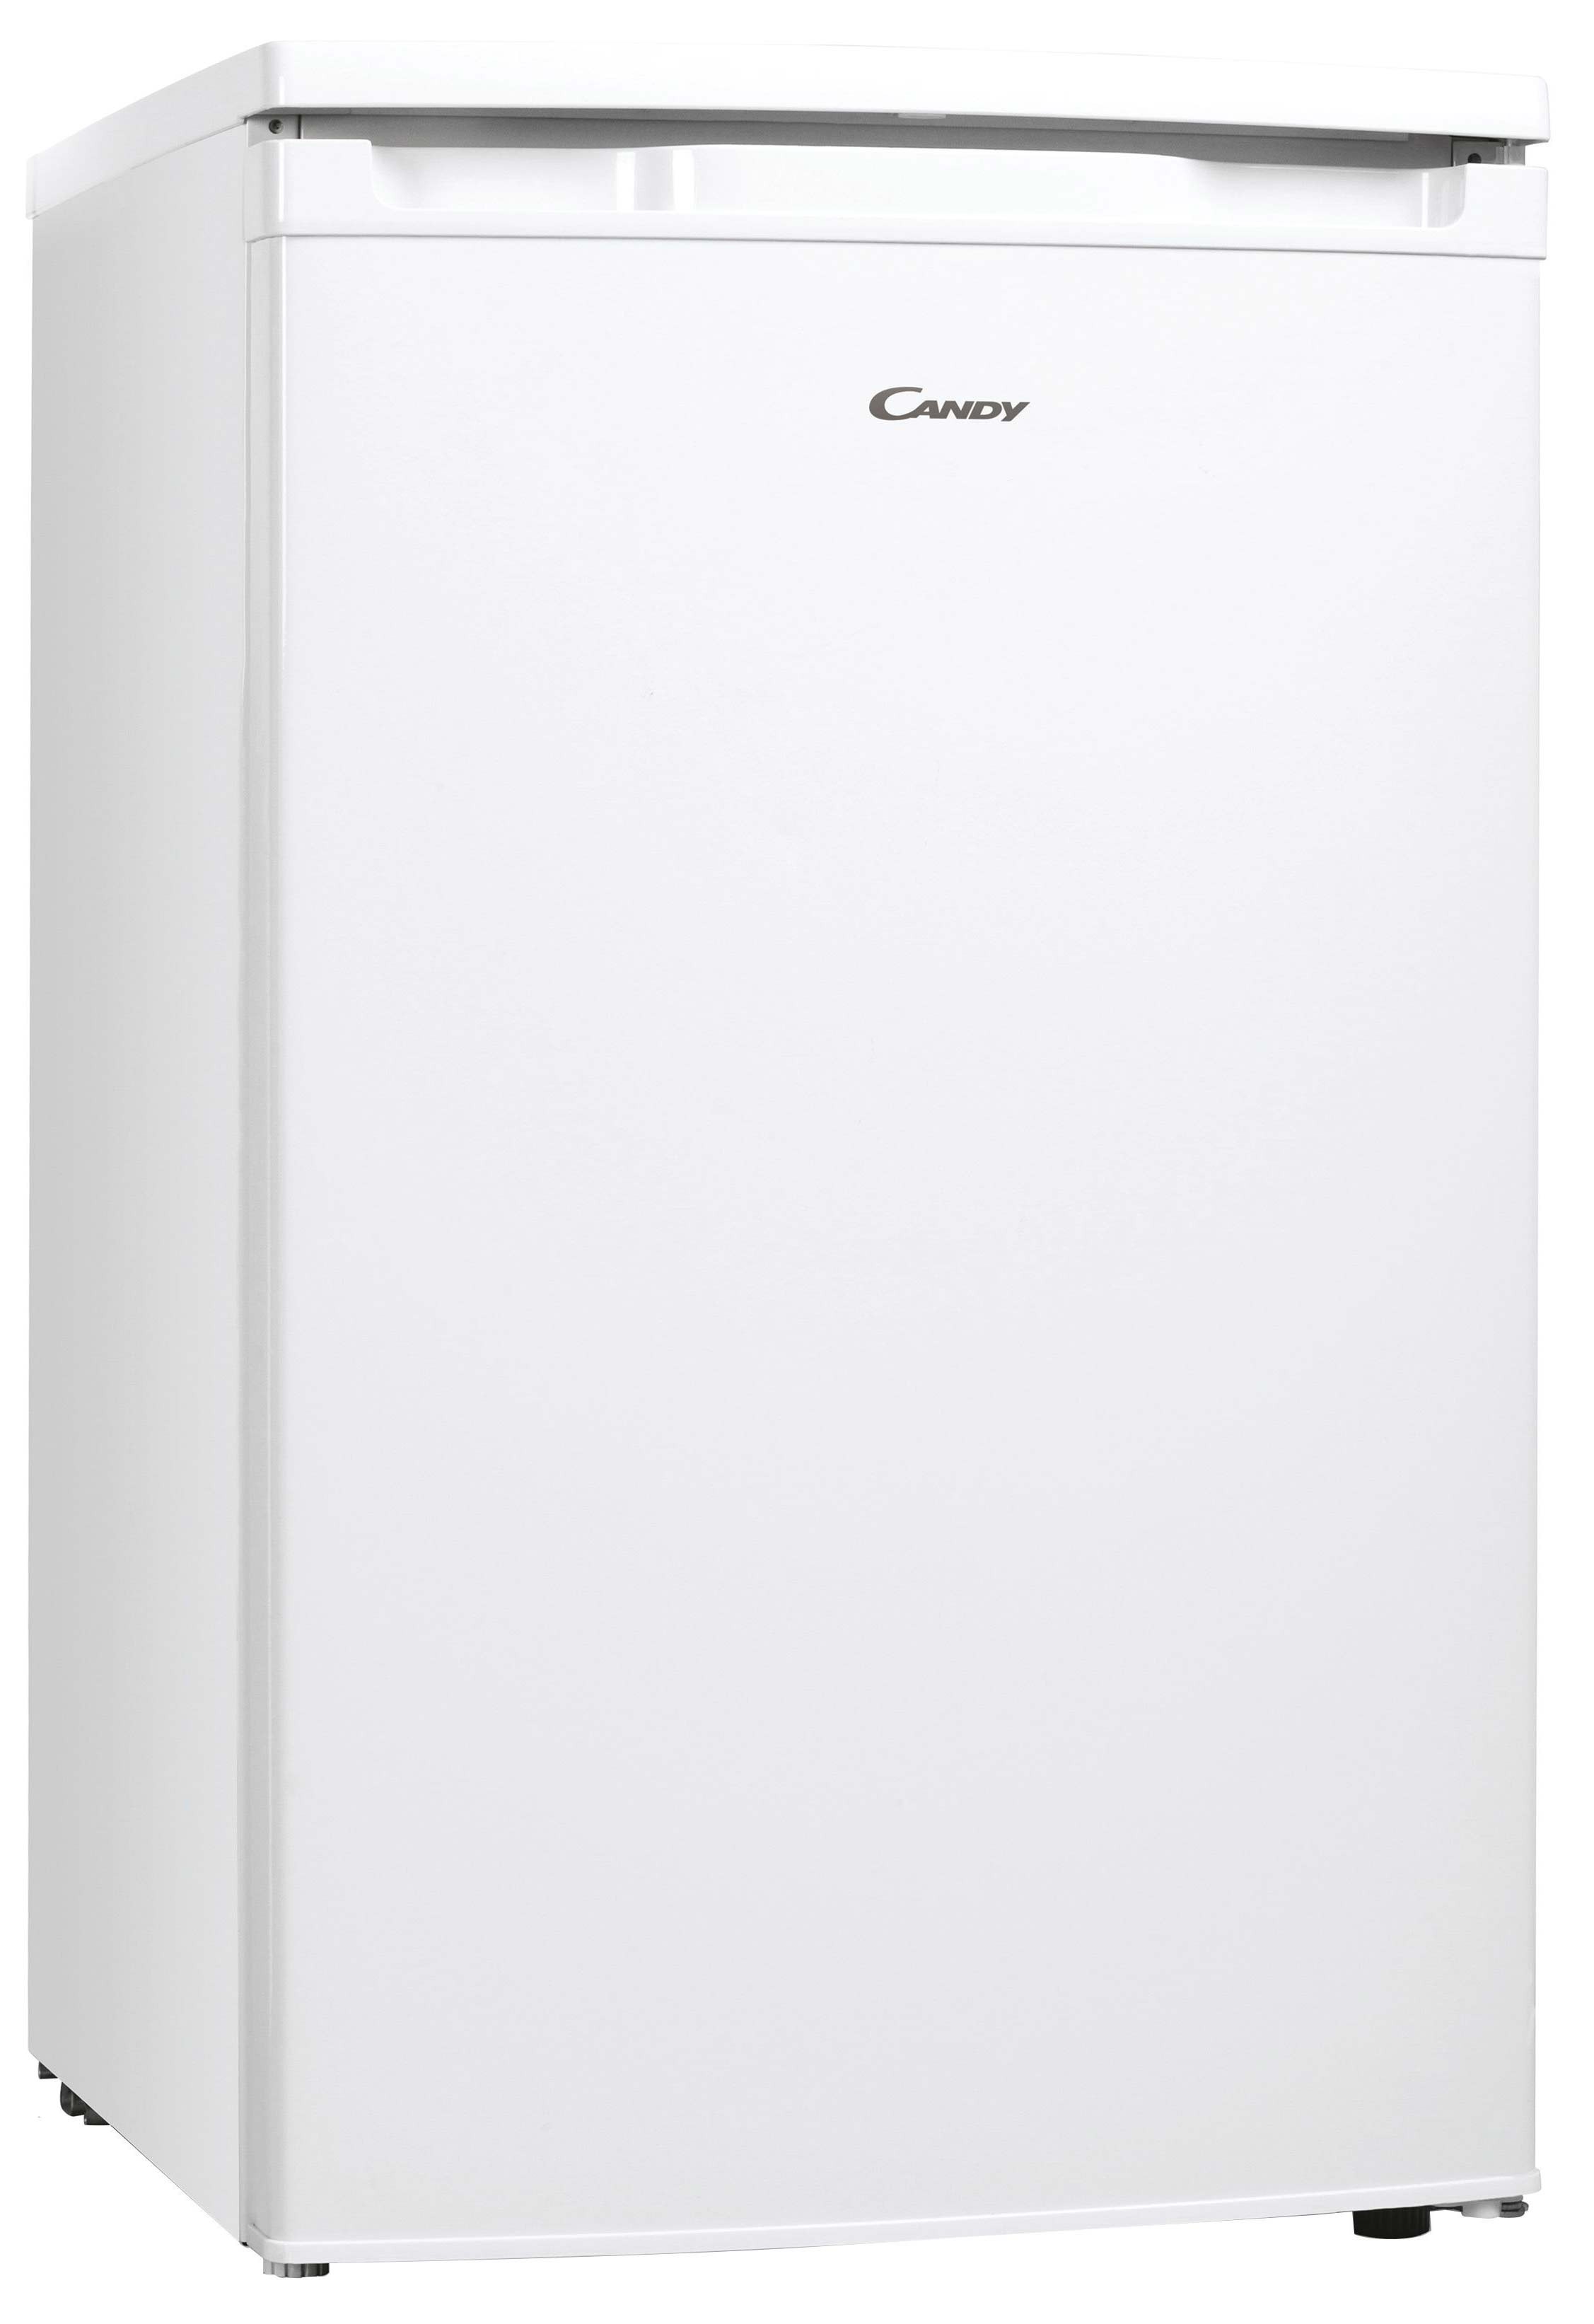 CCTOS502WH (34001847) CHX3 REFRIGERATEUR TABLE TOP CANDY 97 L BLANC